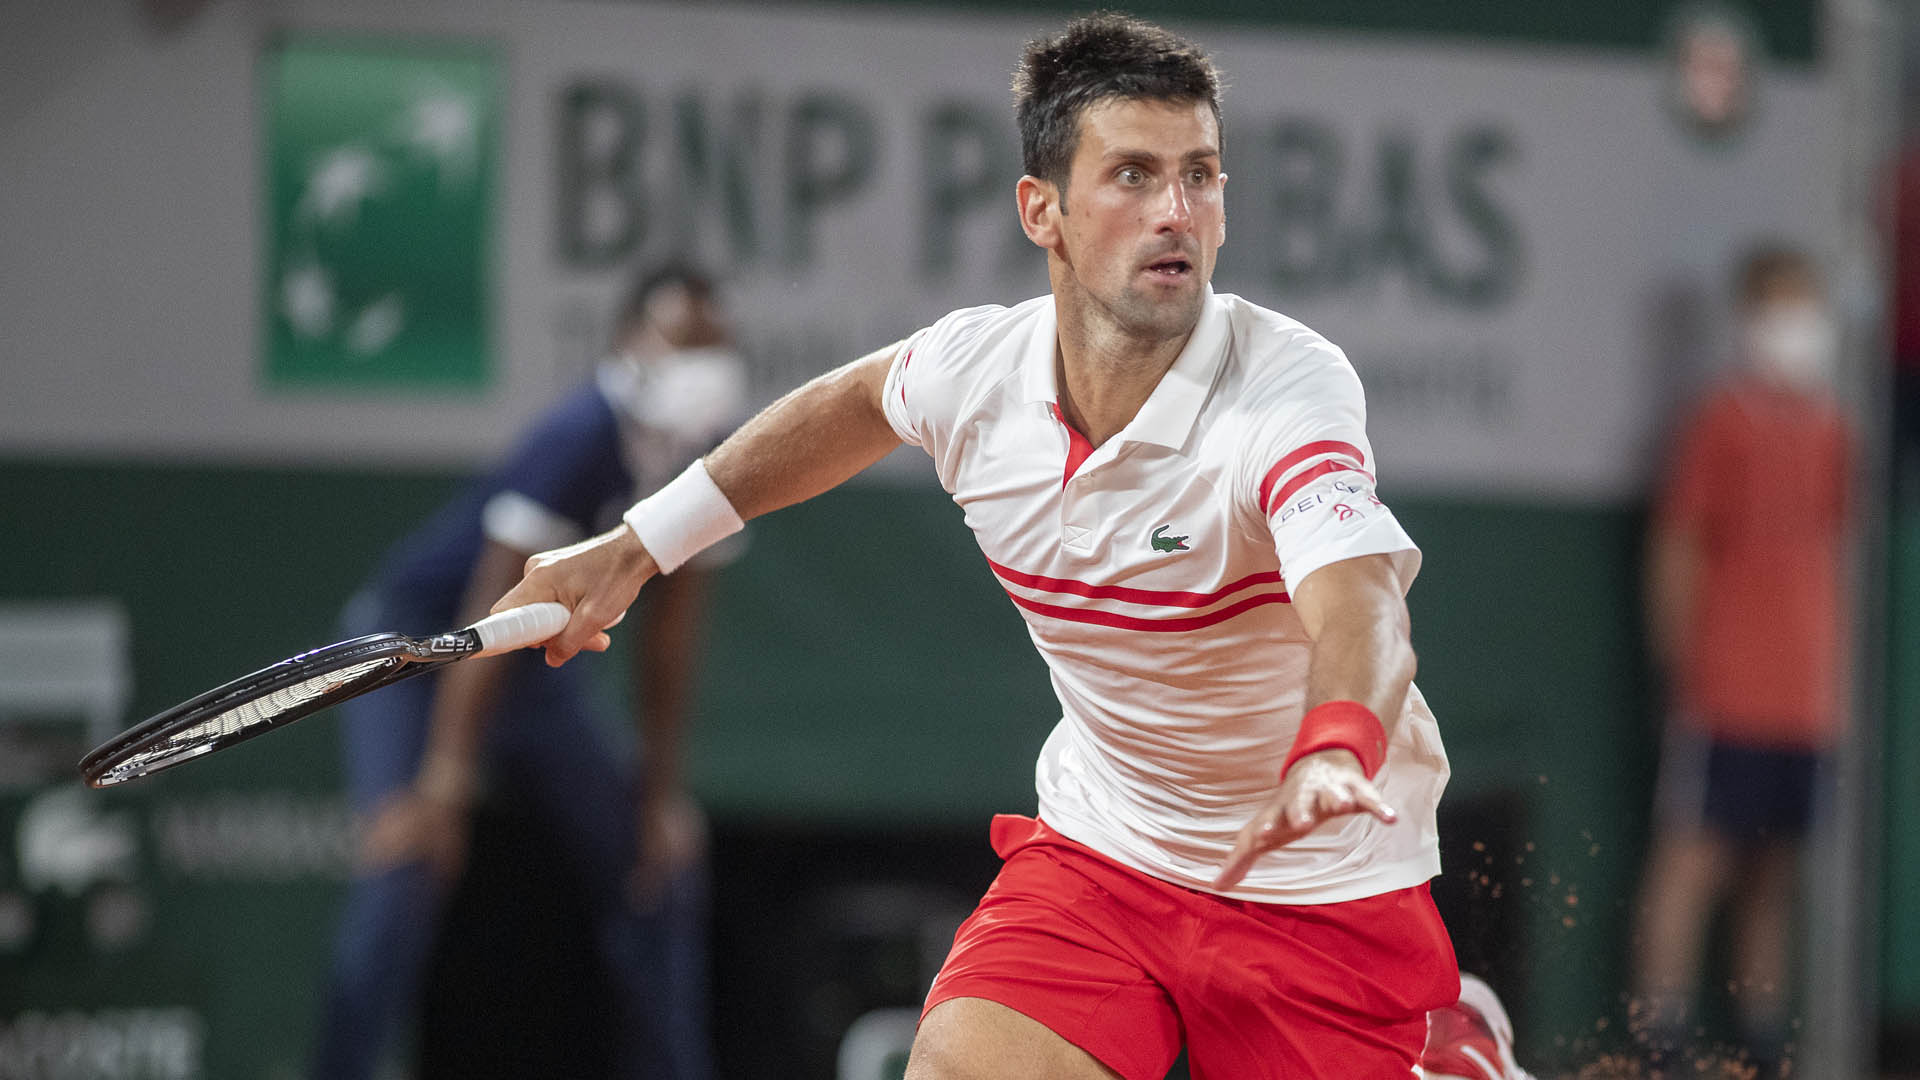 djokovic-vs-tsitsipas-live-stream:-how-to-watch-the-2021-french-open-men’s-final-for-free